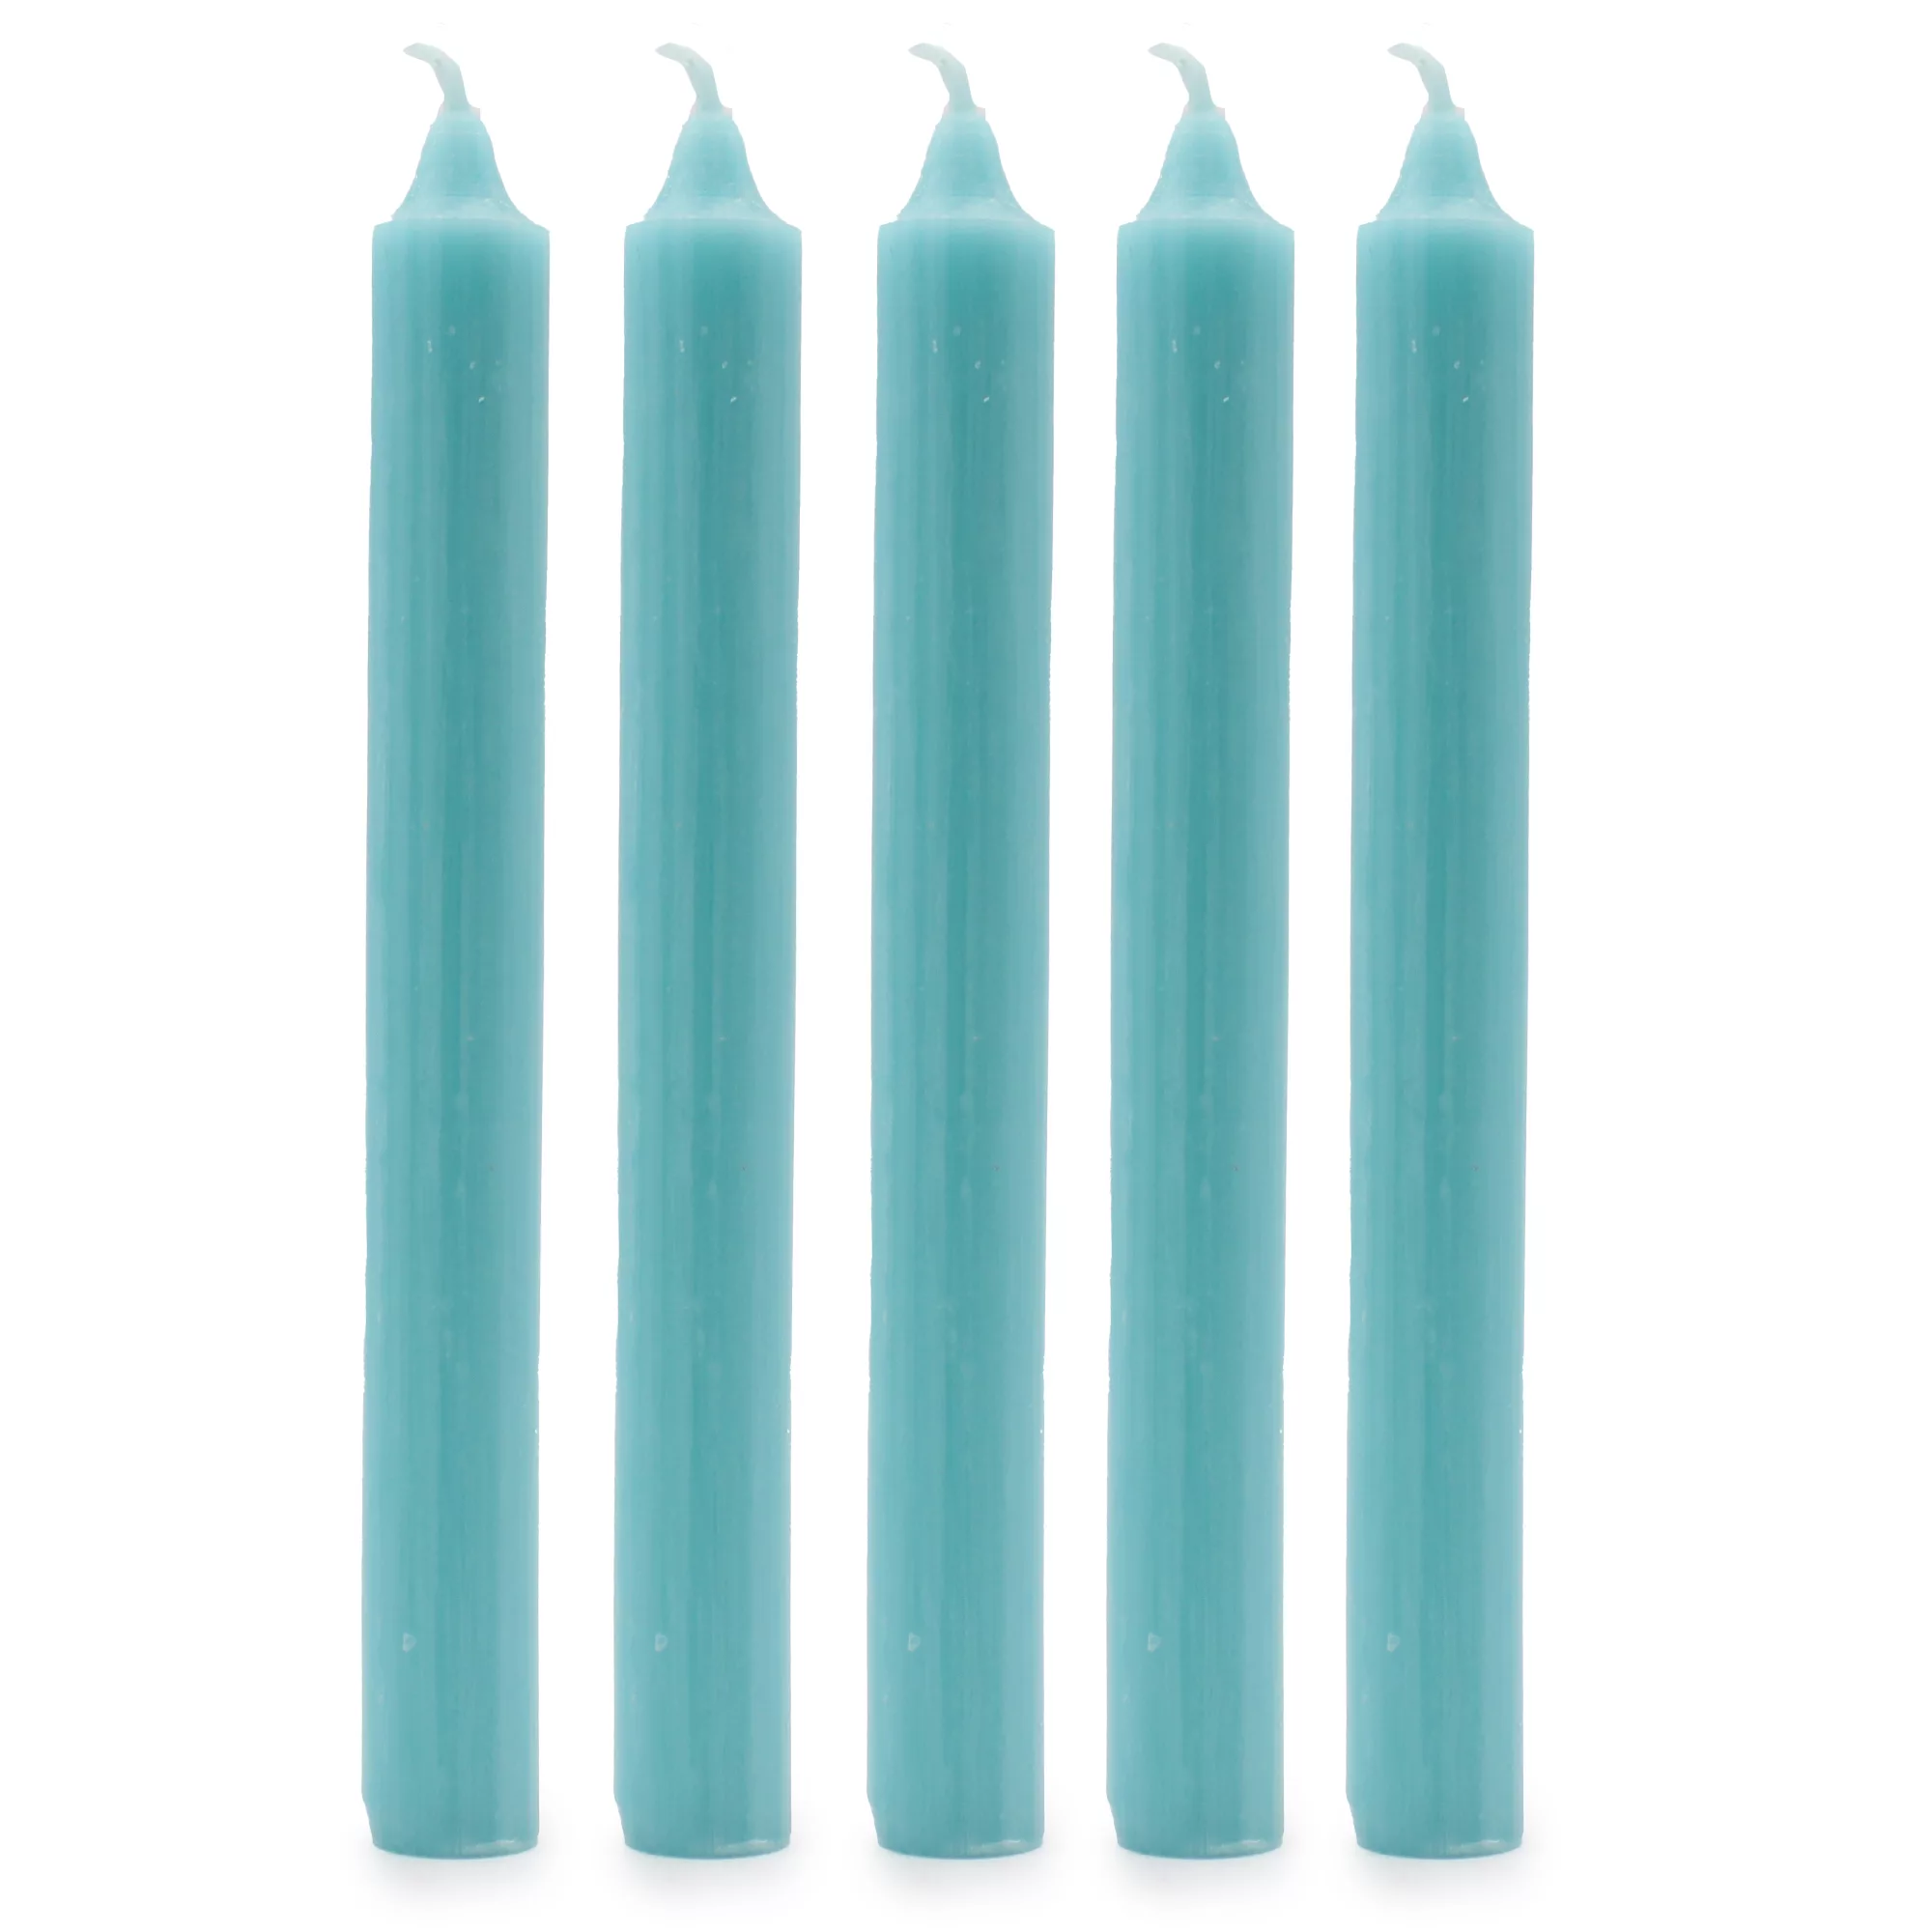 Solid Colour Dinner Candles – Rustic Aqua – Pack of 5